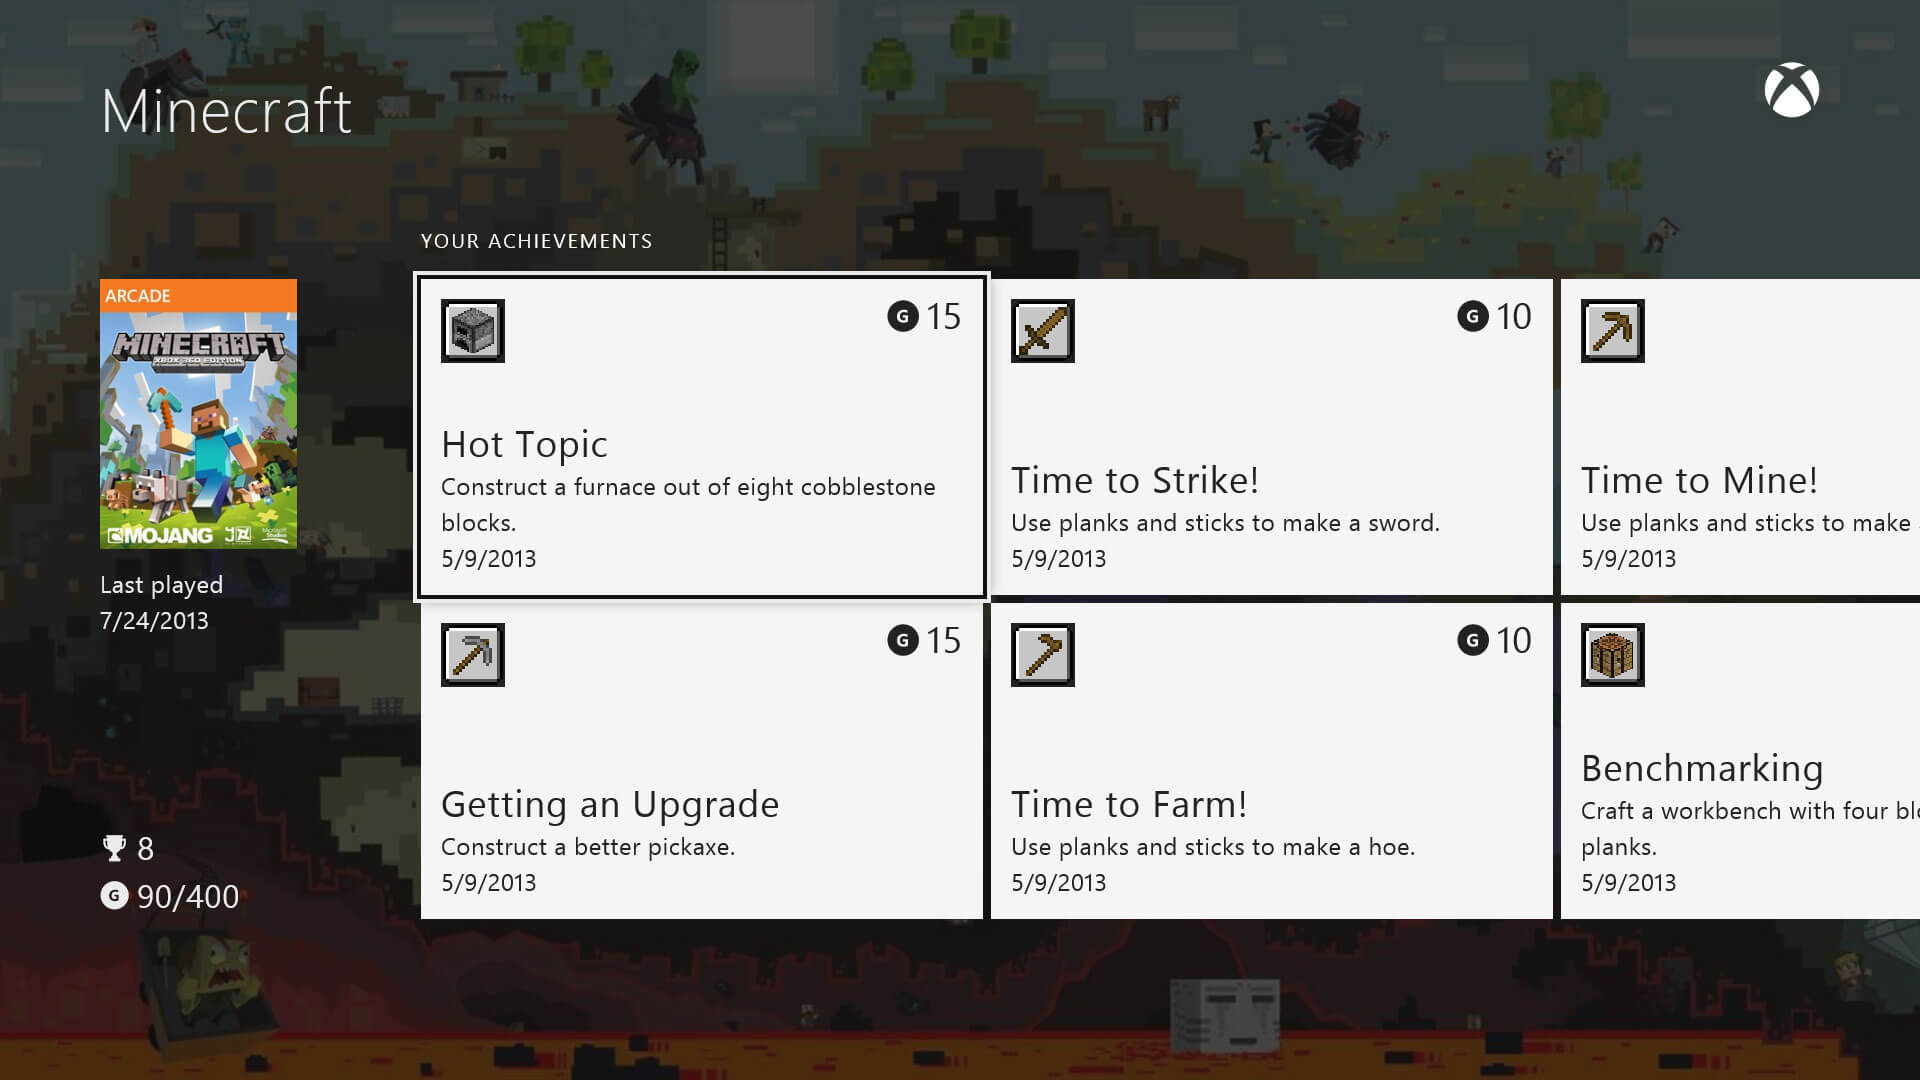 An image of the X-Box One unlocked achievement screen for the game Minecraft. The achievements appear as tiles in two rows that scroll horizontally off-screen.